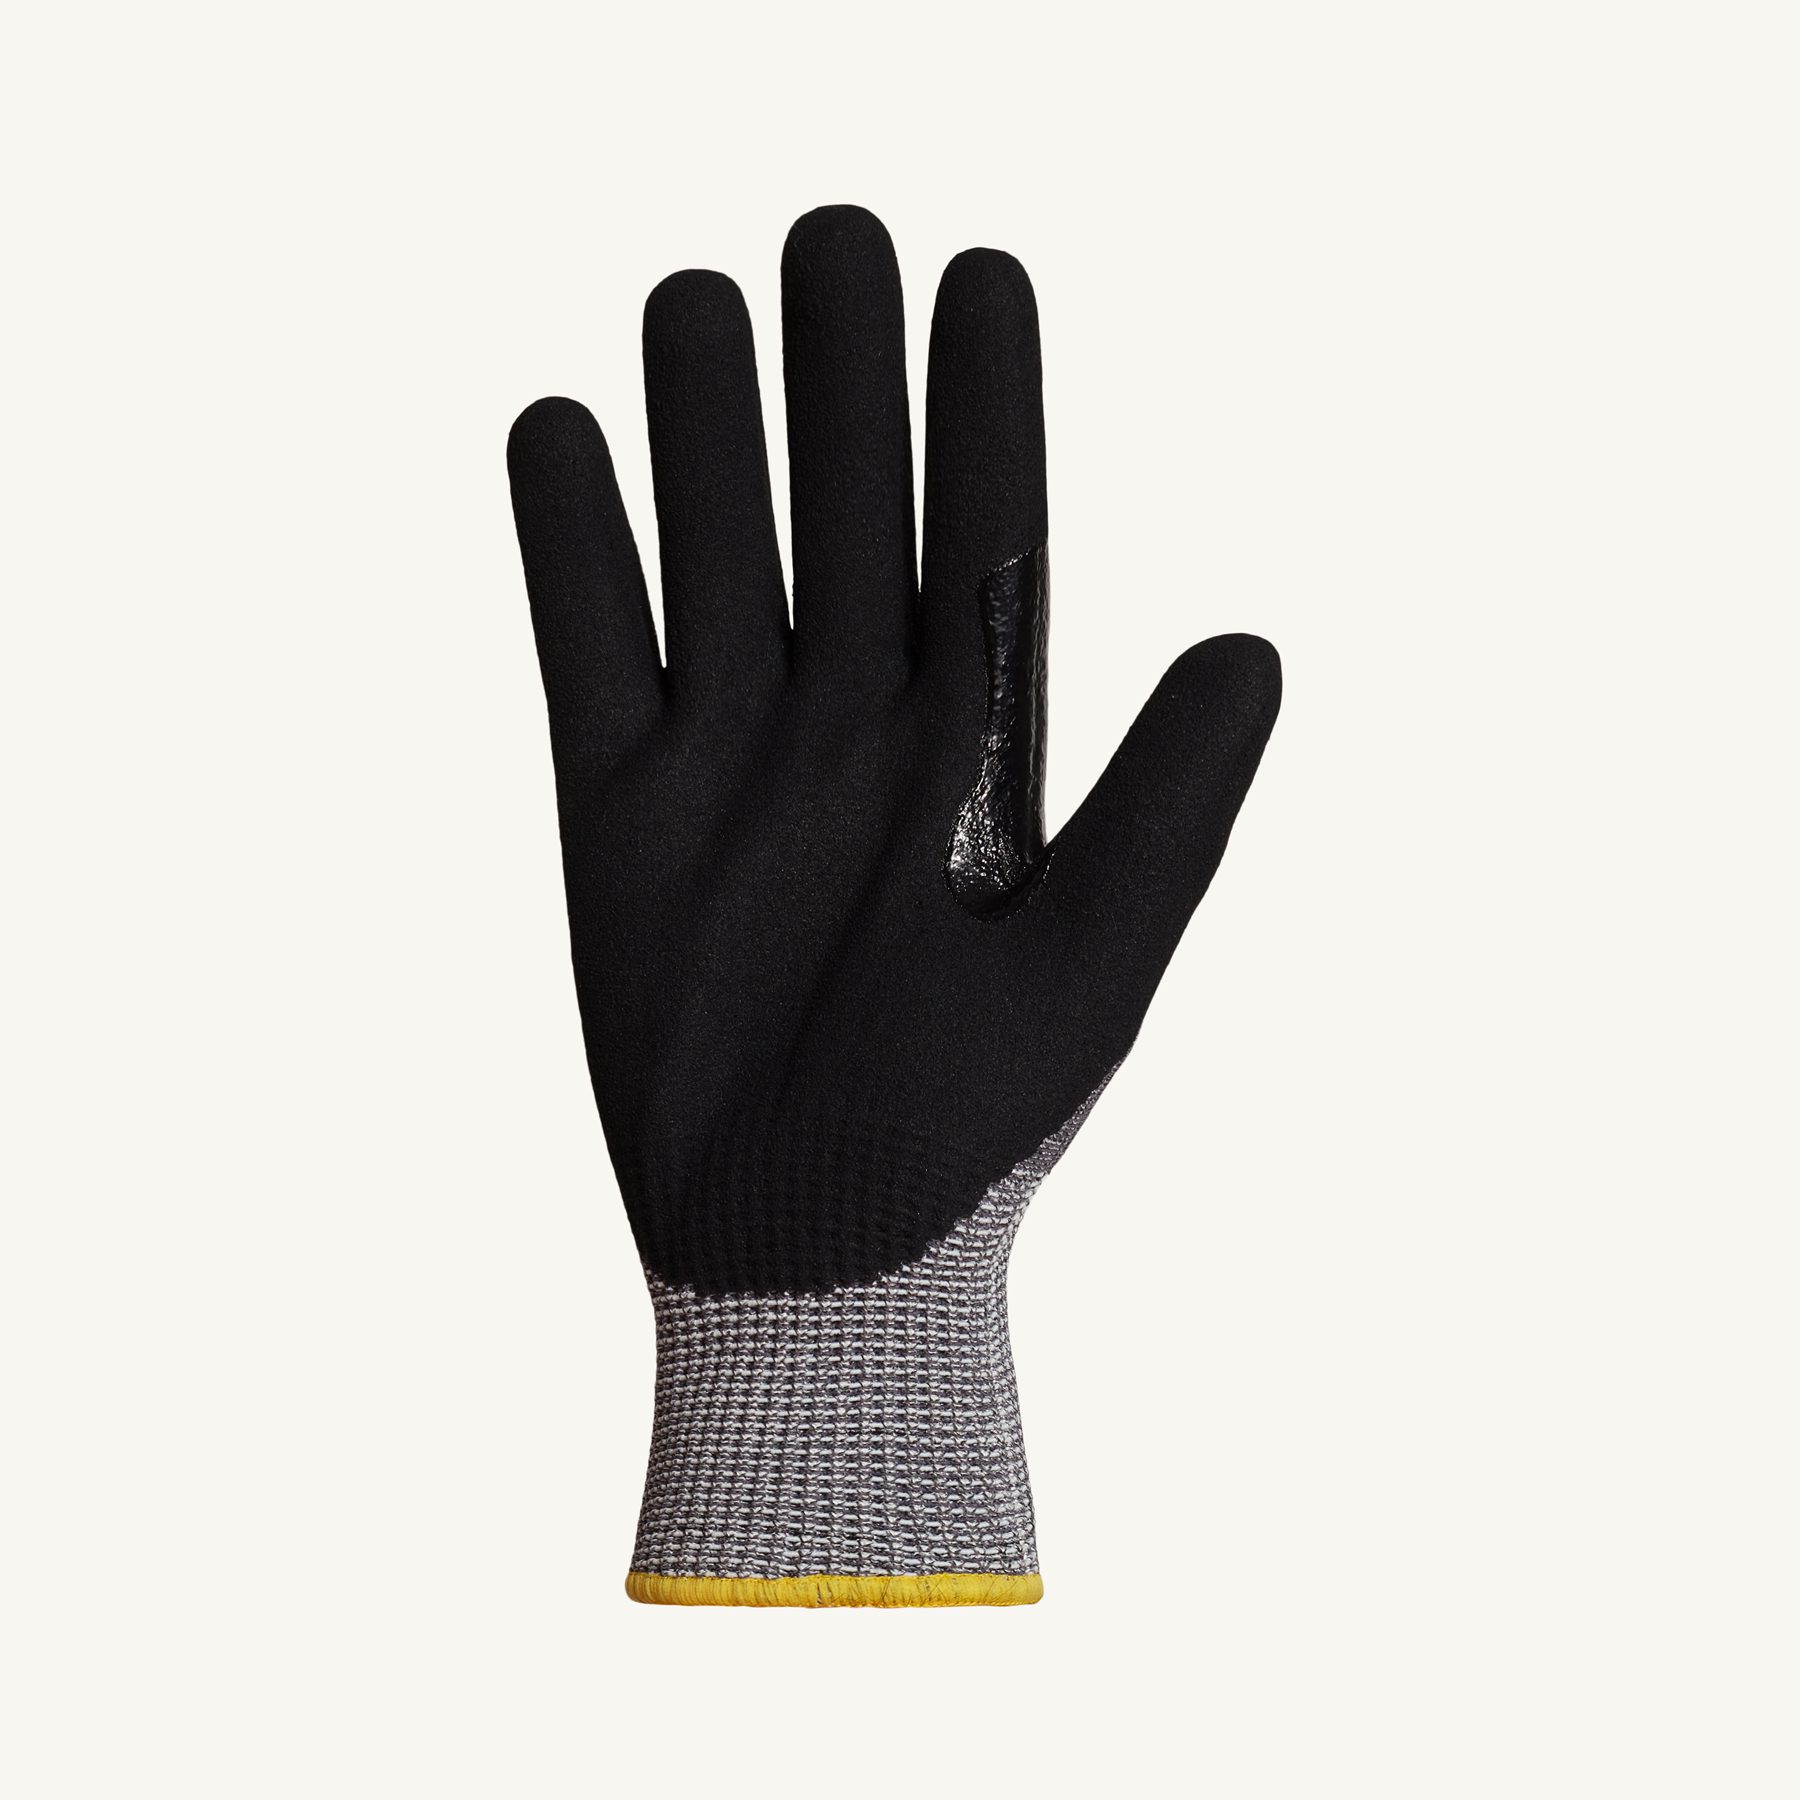 #STACXPNRT - Superior Glove® TenActiv™ Composite-Knit Cut-Resistant Glove with Reinforced Thumb and Micropore Nitrile Grip